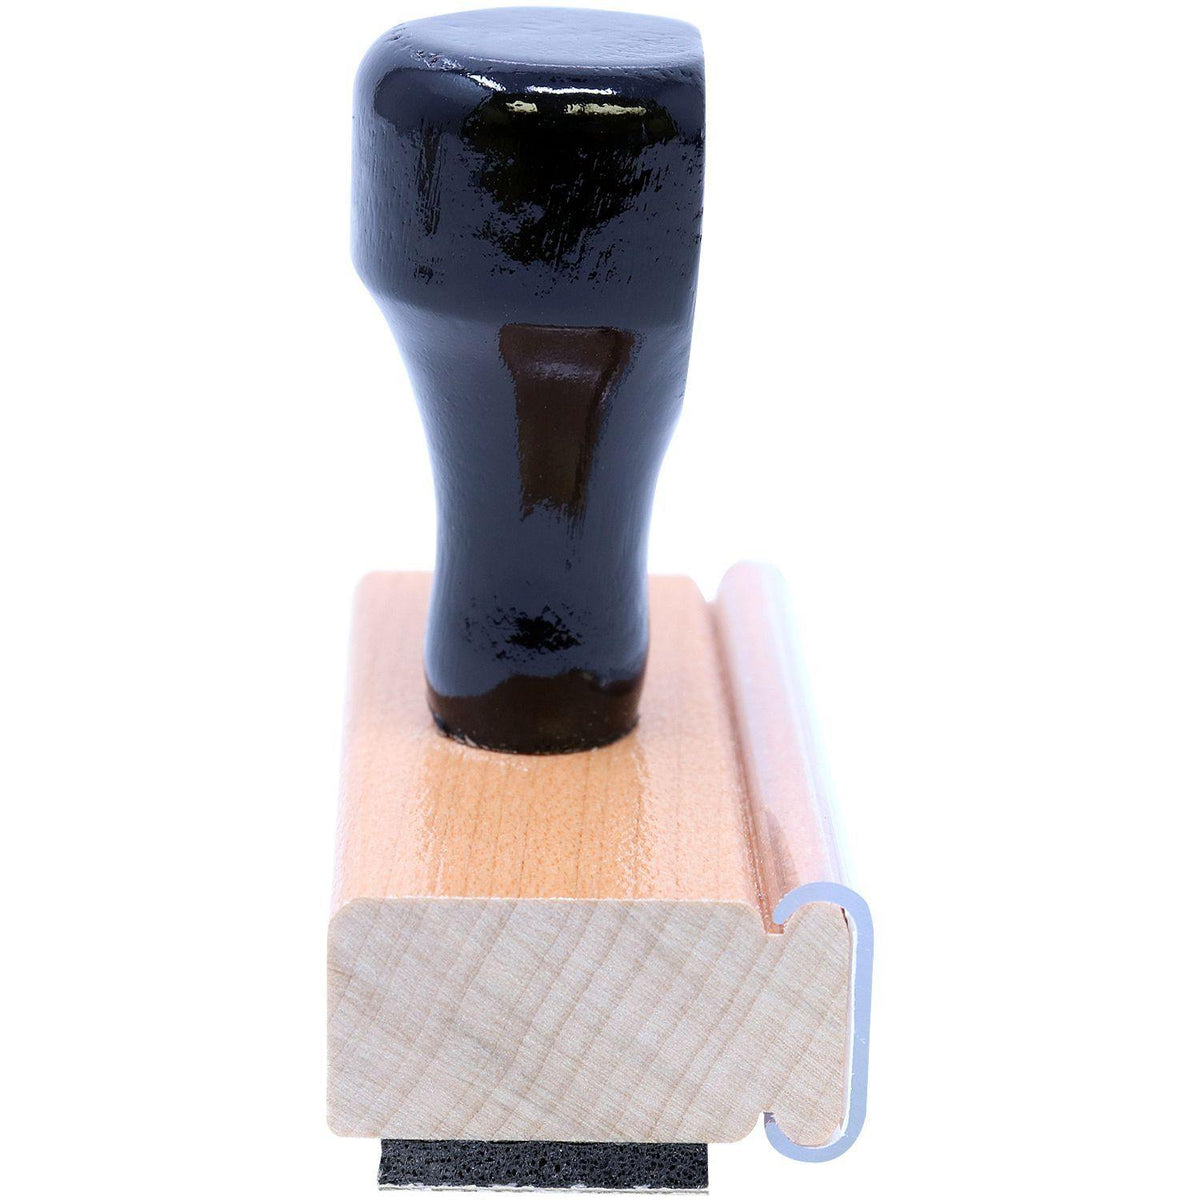 Narrow Font File Copy Rubber Stamp - Engineer Seal Stamps - Brand_Acorn, Impression Size_Small, Stamp Type_Regular Stamp, Type of Use_Business, Type of Use_Office, Type of Use_Professional